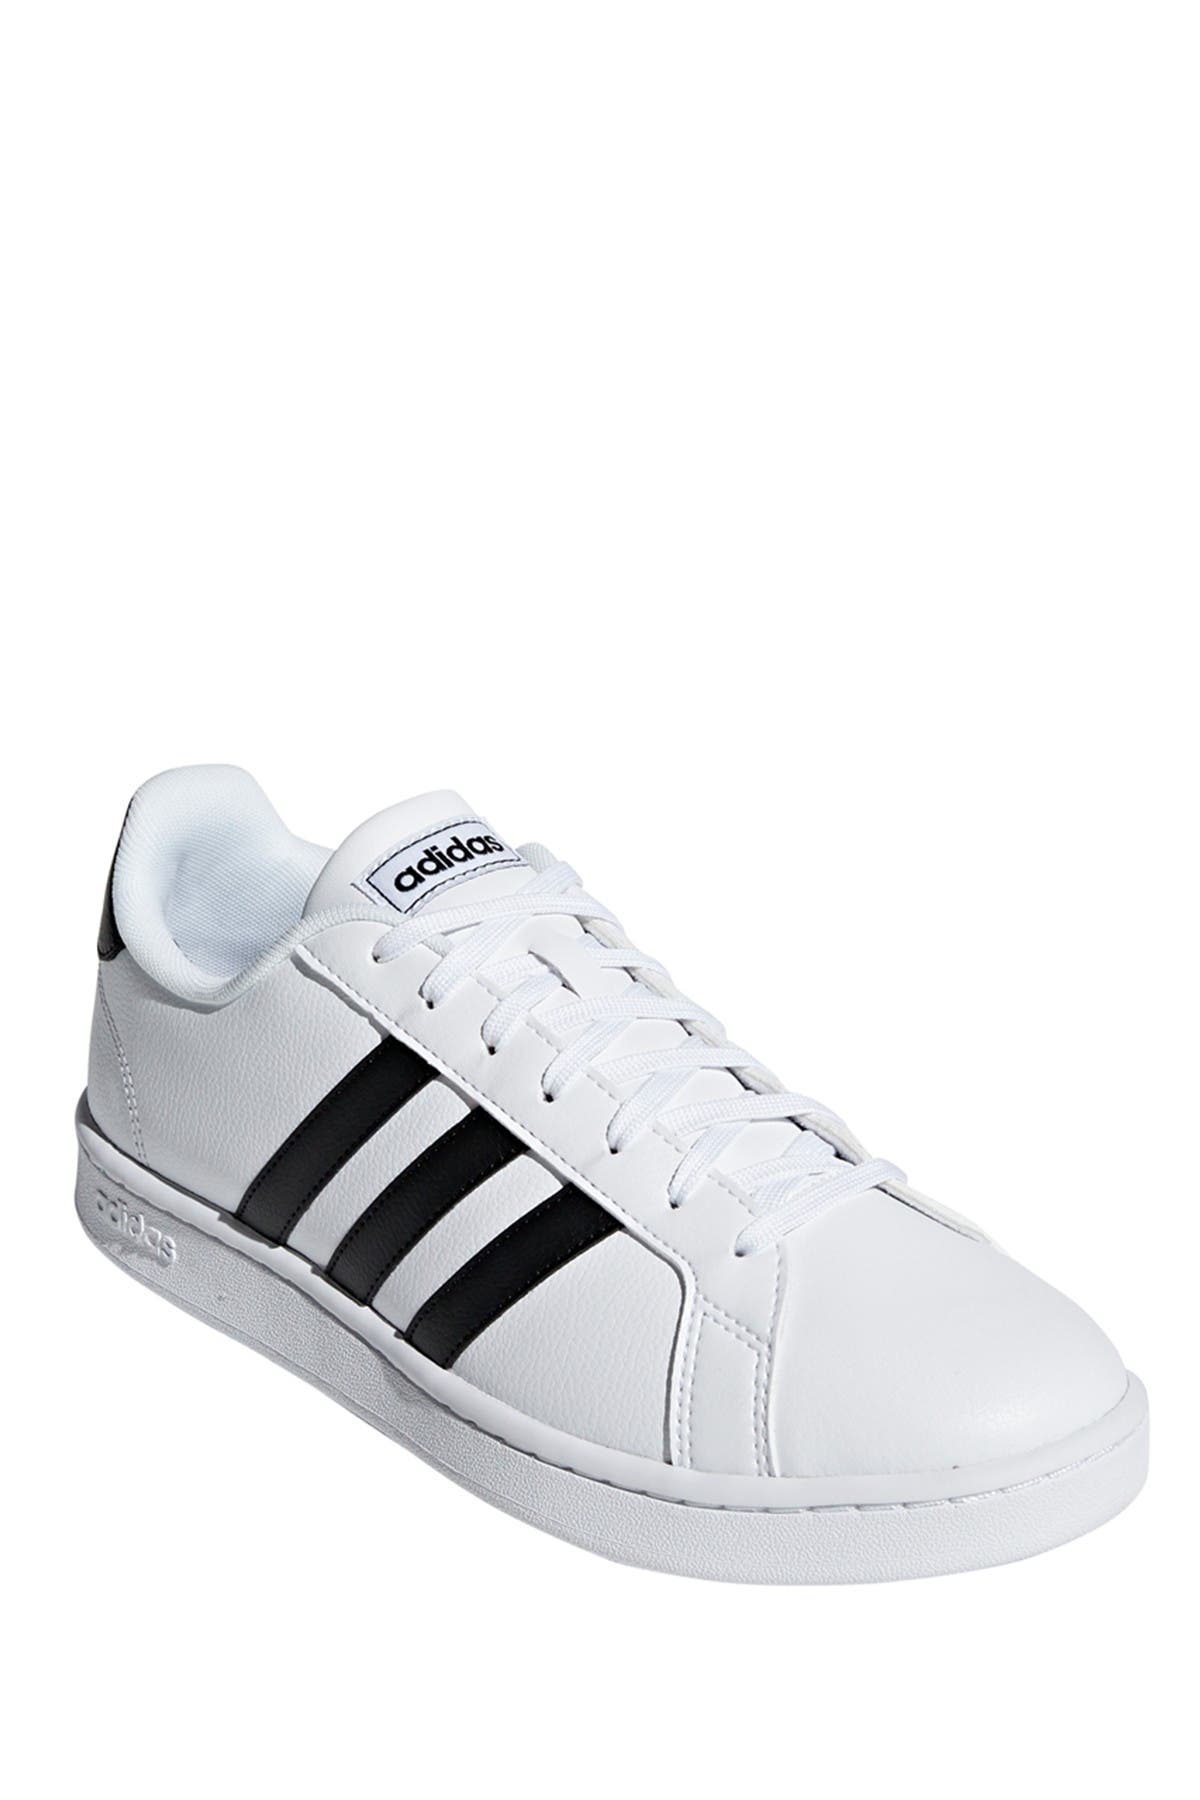 all white leather adidas